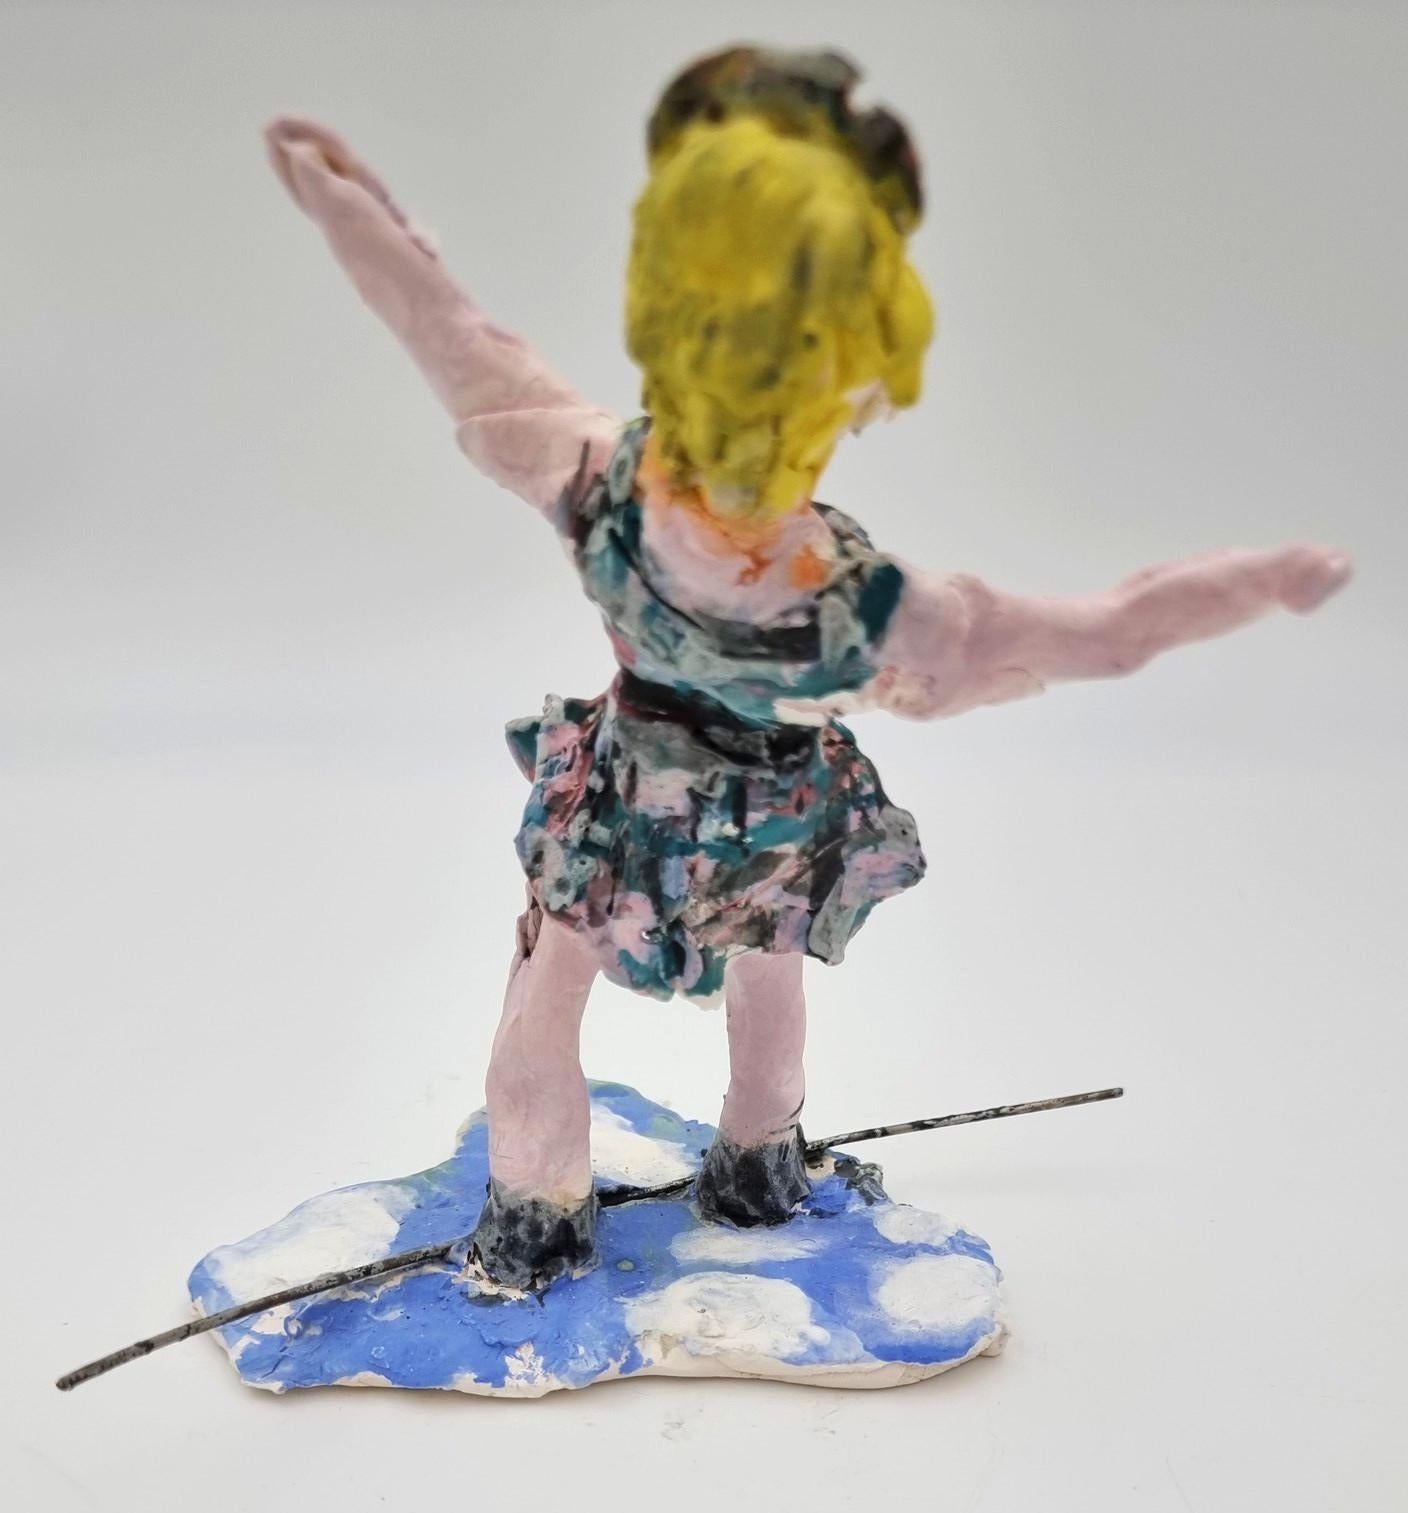 Ann Rothman
Female Tightrope Acrobat (Circus, Whimsical, Viola Frey, Delicate, Playful, Fun, Cirque du Soleil, The Ringling Bros., Barnum & Bailey)
2021
Porcelain, Low Fire Glazes, Crayons, Watercolors
Fired Cone 06, 04
6 x 7 x 4.5 inches
COA